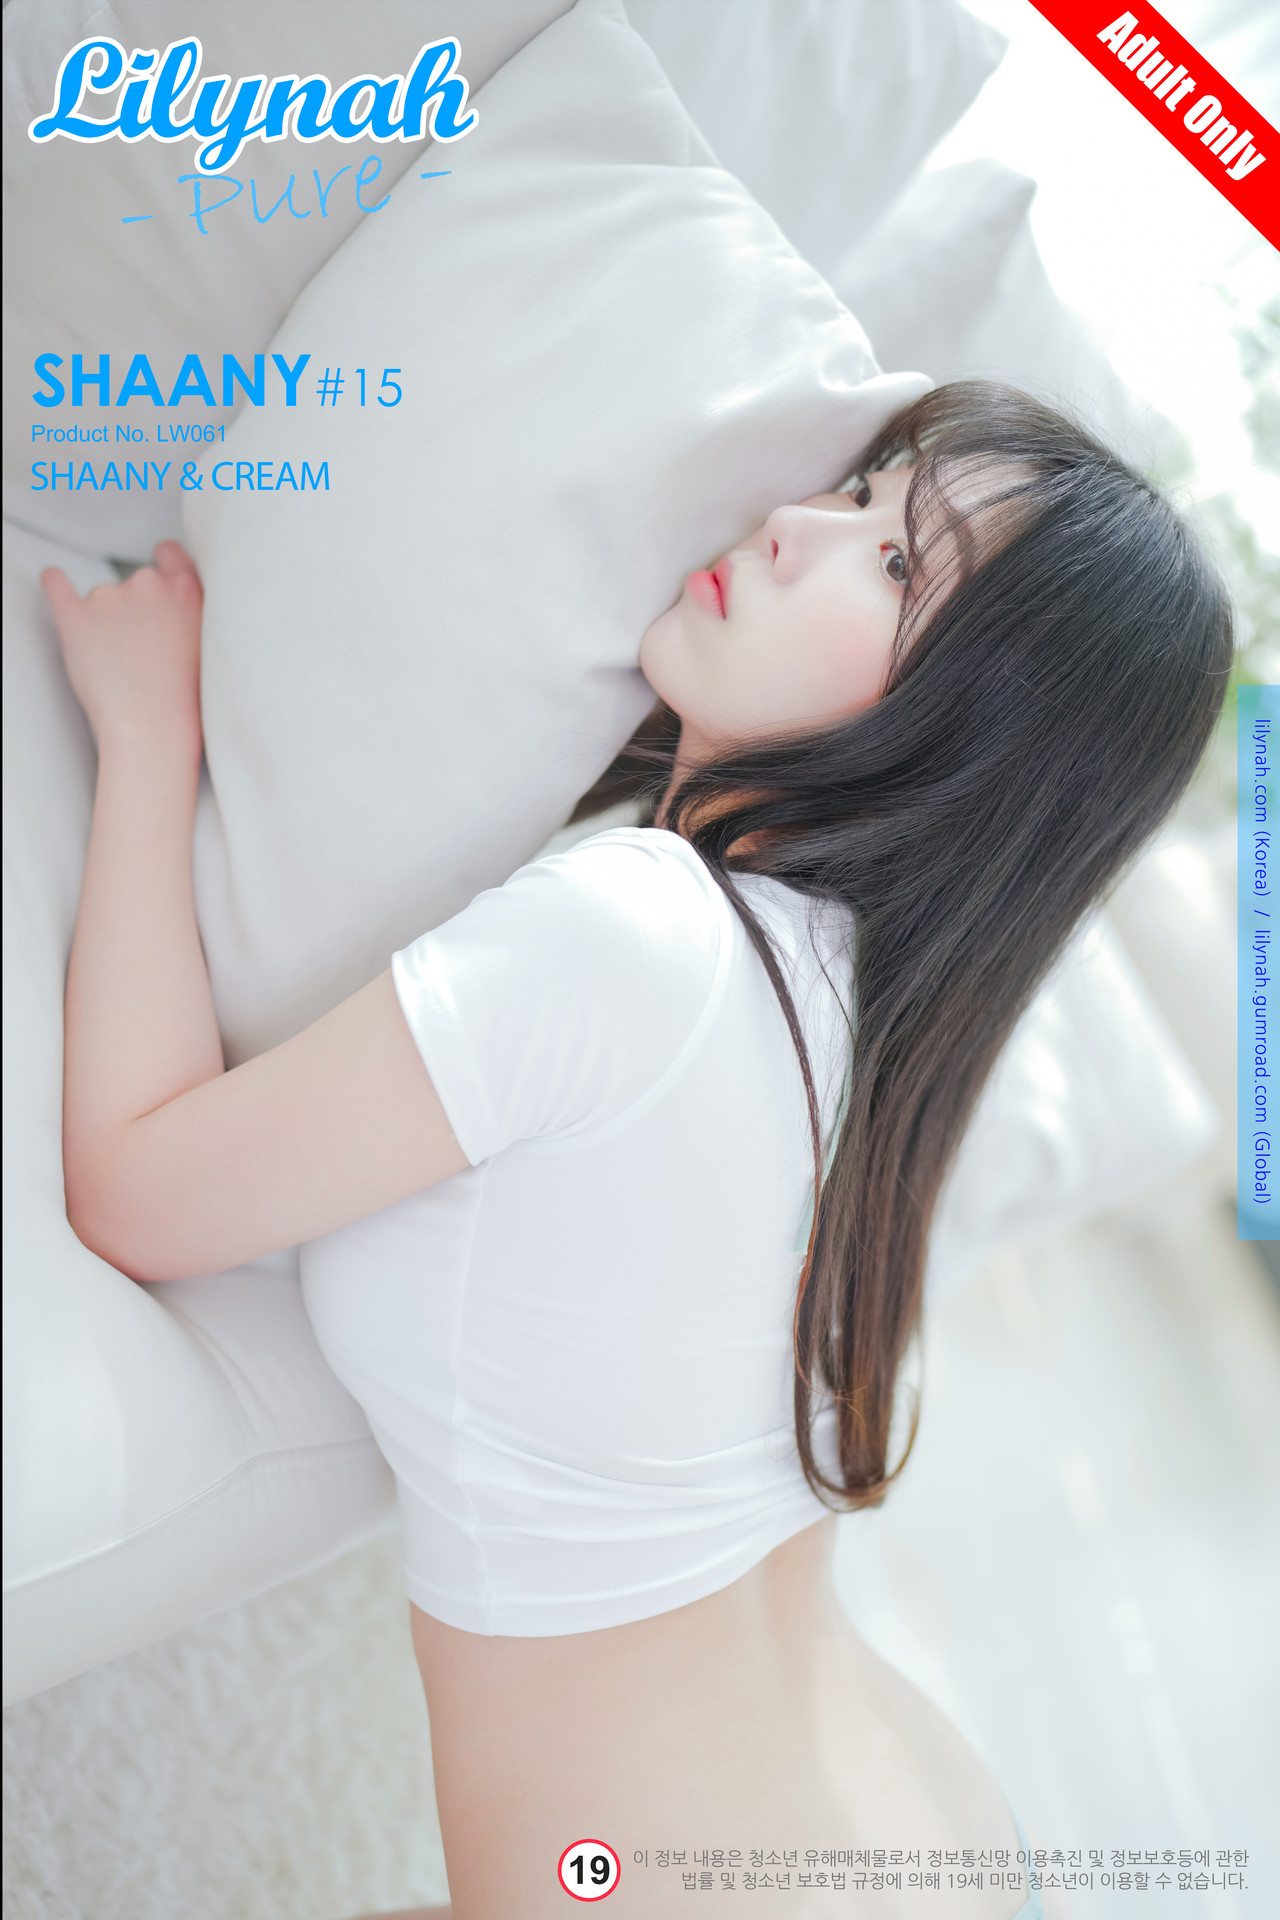 Shaany 샤니, [Lilynah] Shaany & Cream